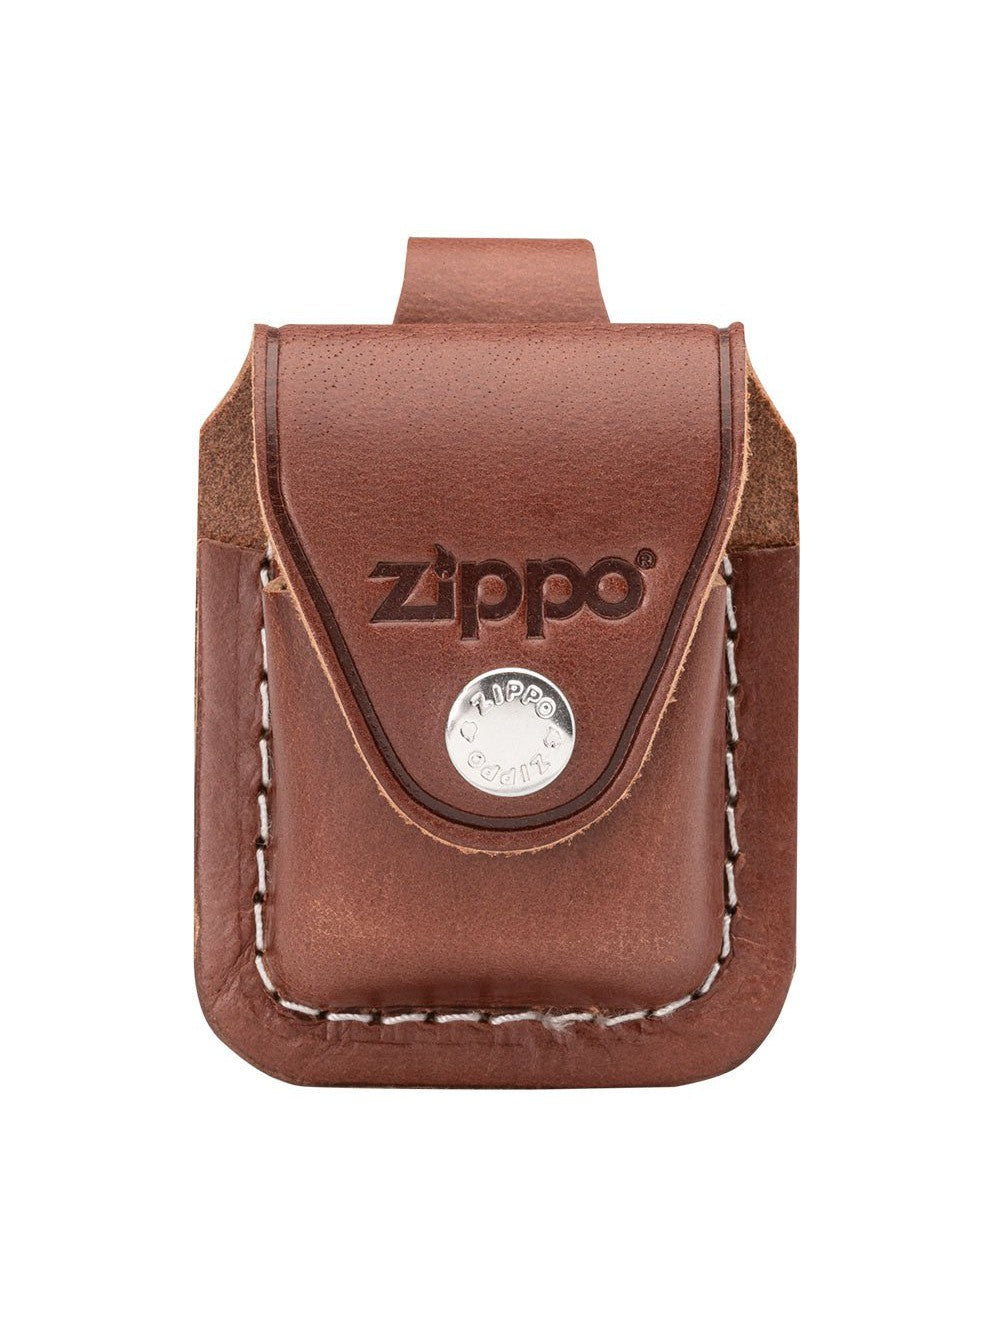 Zippo Lighter Pouch with Loop - Brown LPLB